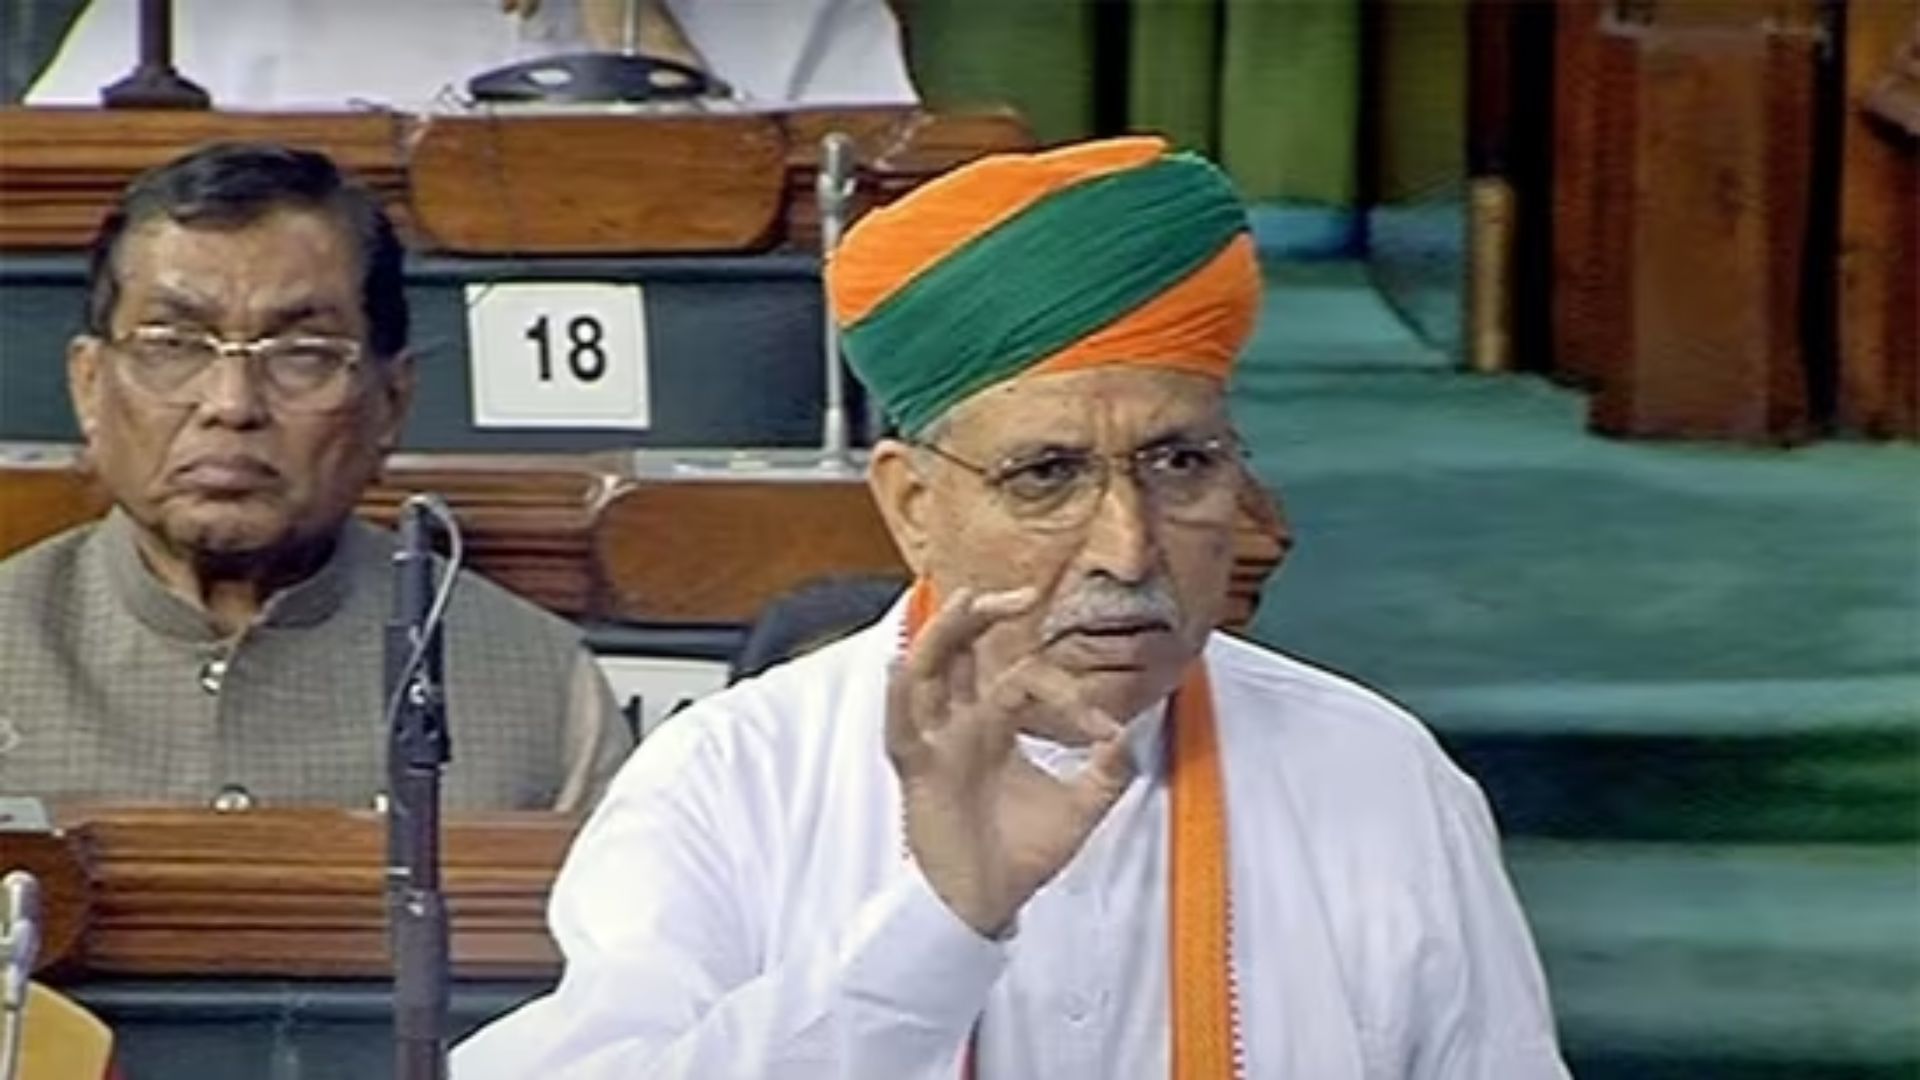 “Discussions will be held”: Arjun Ram Meghwal on Ram Temple resolution in Parliament